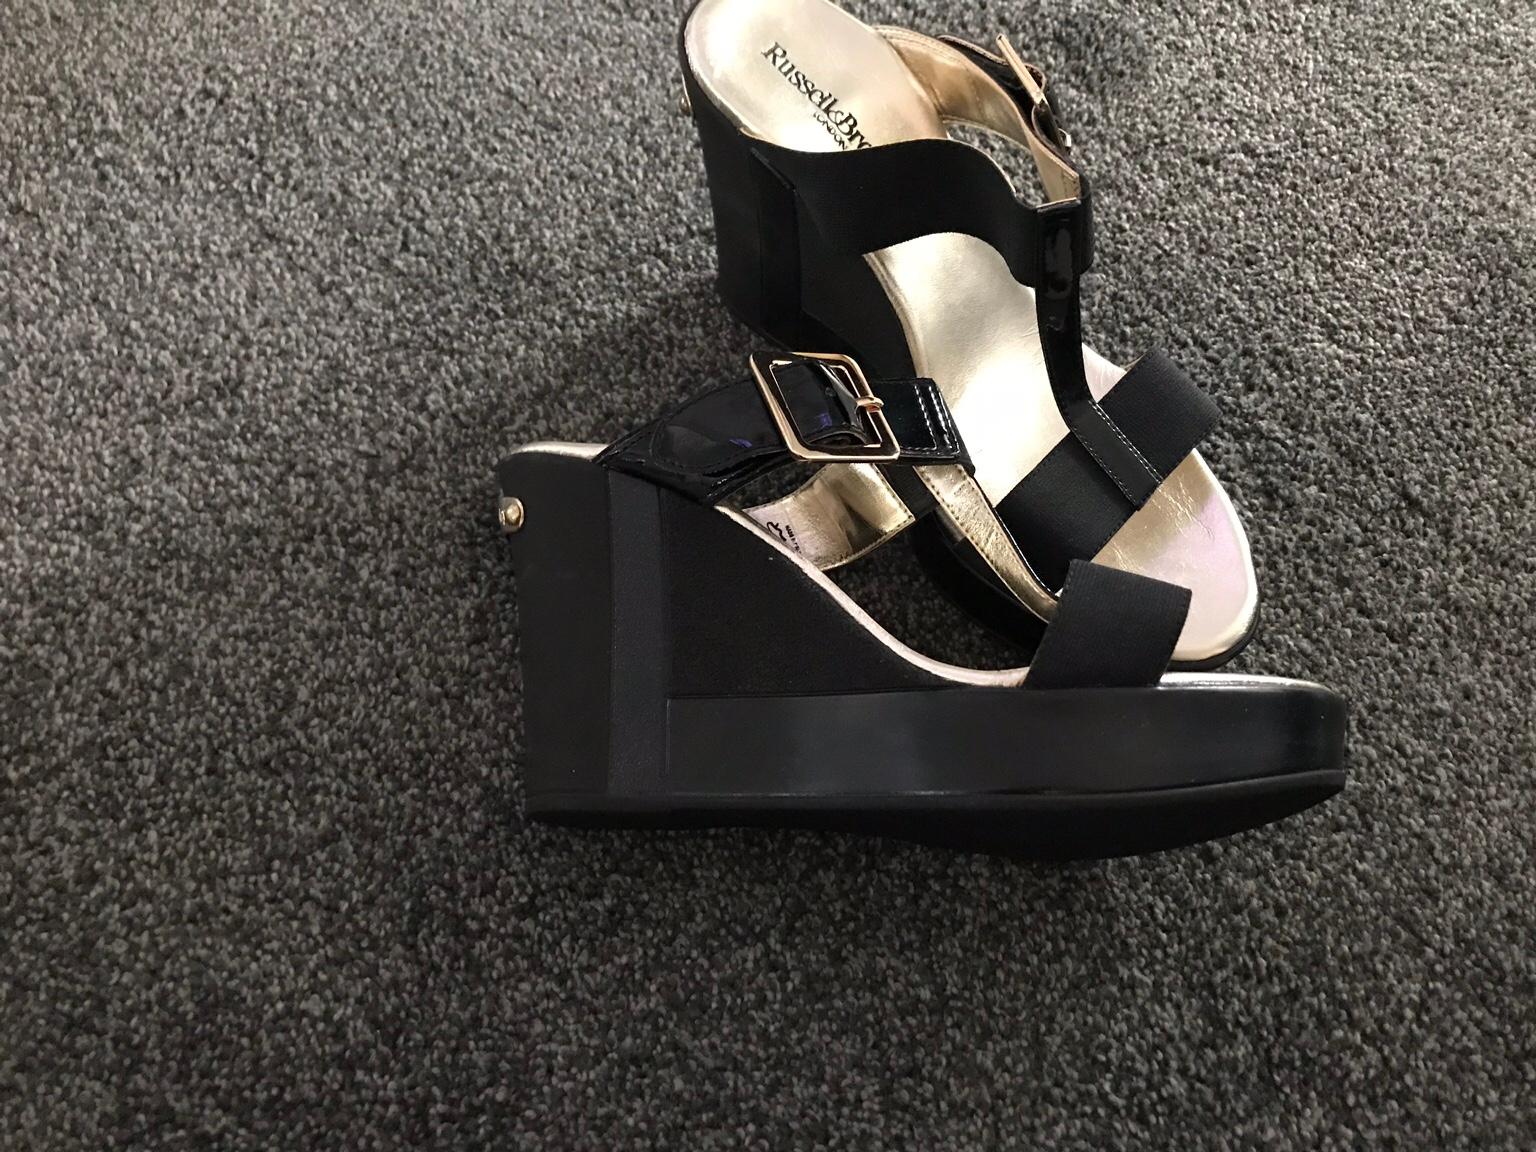 russell and bromley wedge sandals